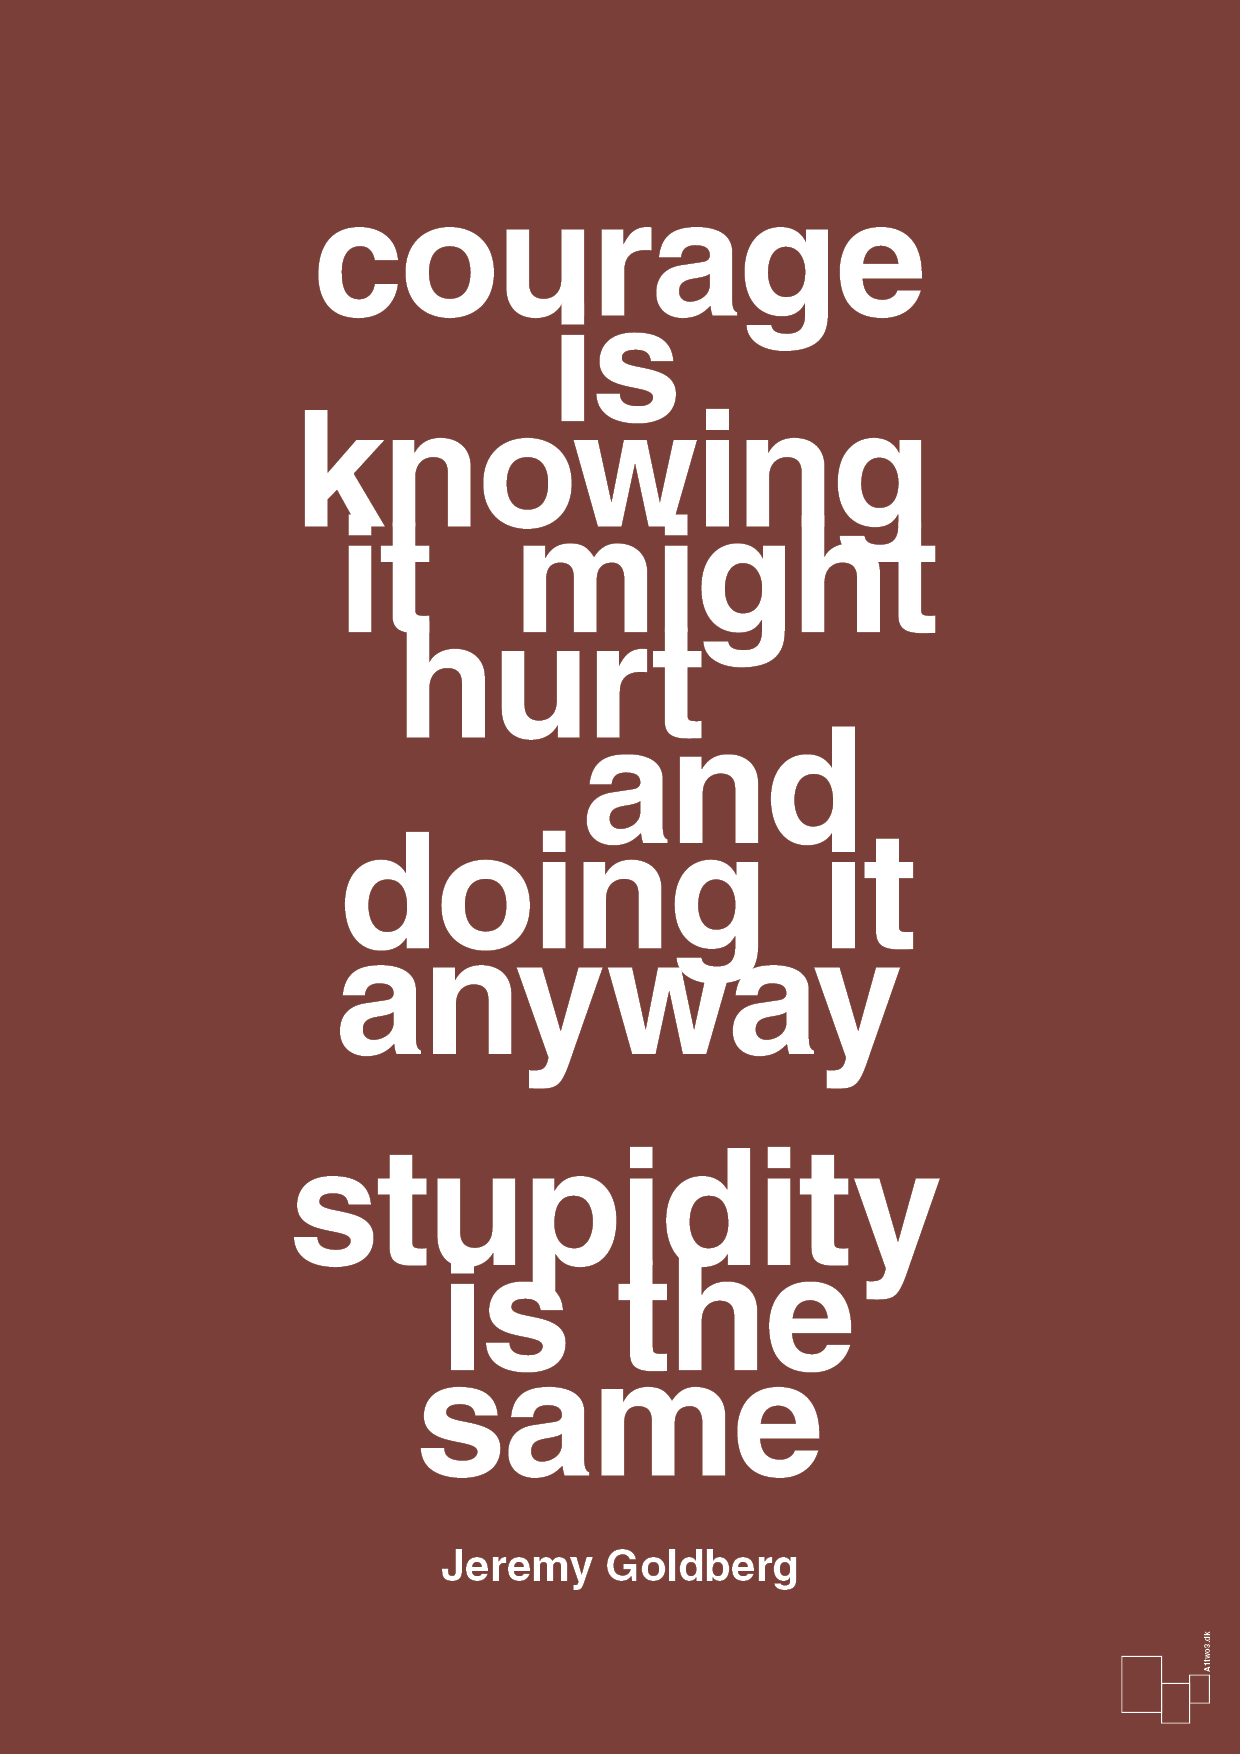 courage is knowing it might hurt and doing it anyway stupidity is the same - Plakat med Citater i Red Pepper